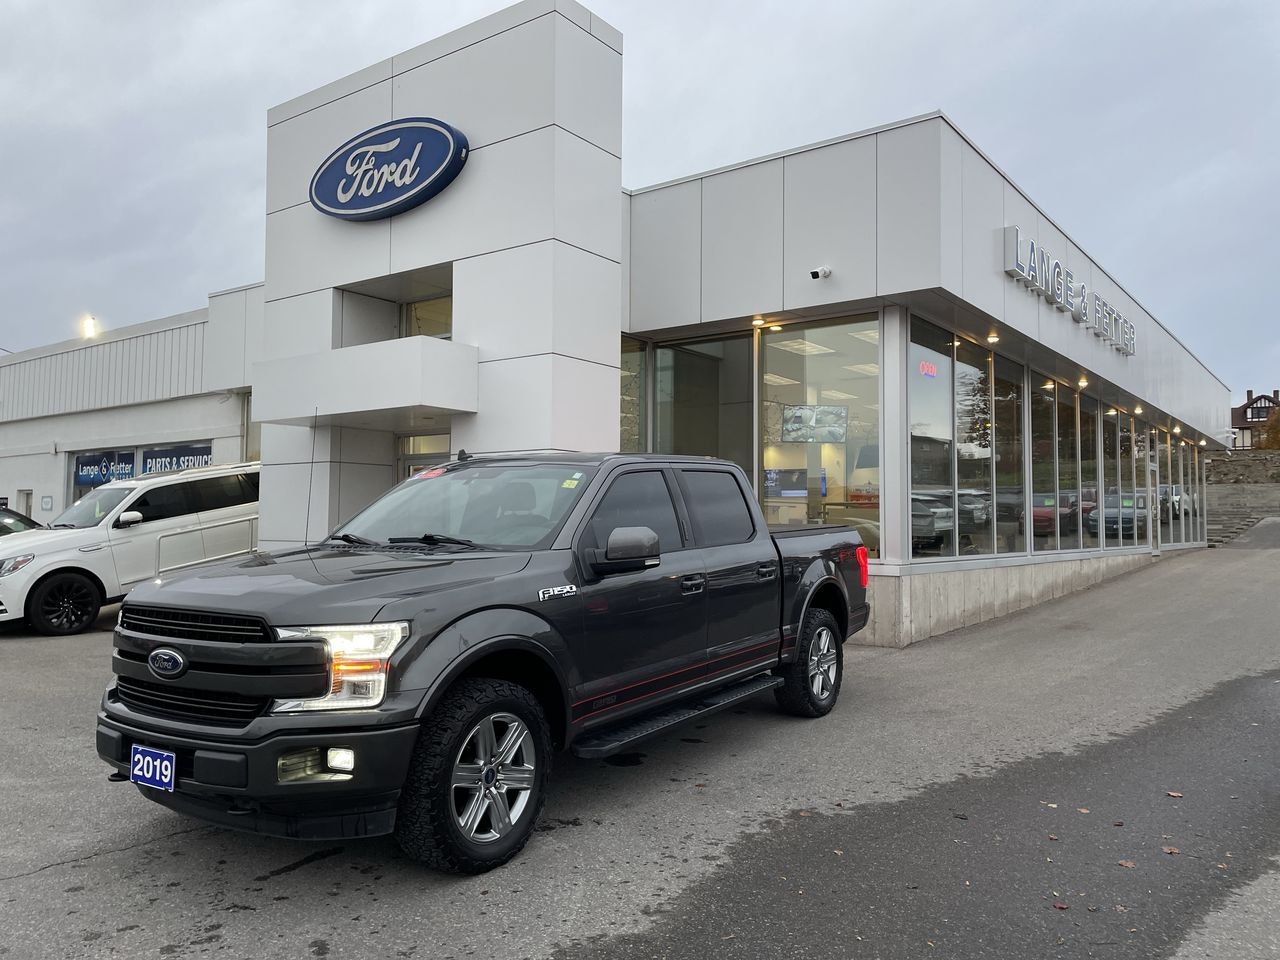 2019 Ford F-150 - 21440A Full Image 1